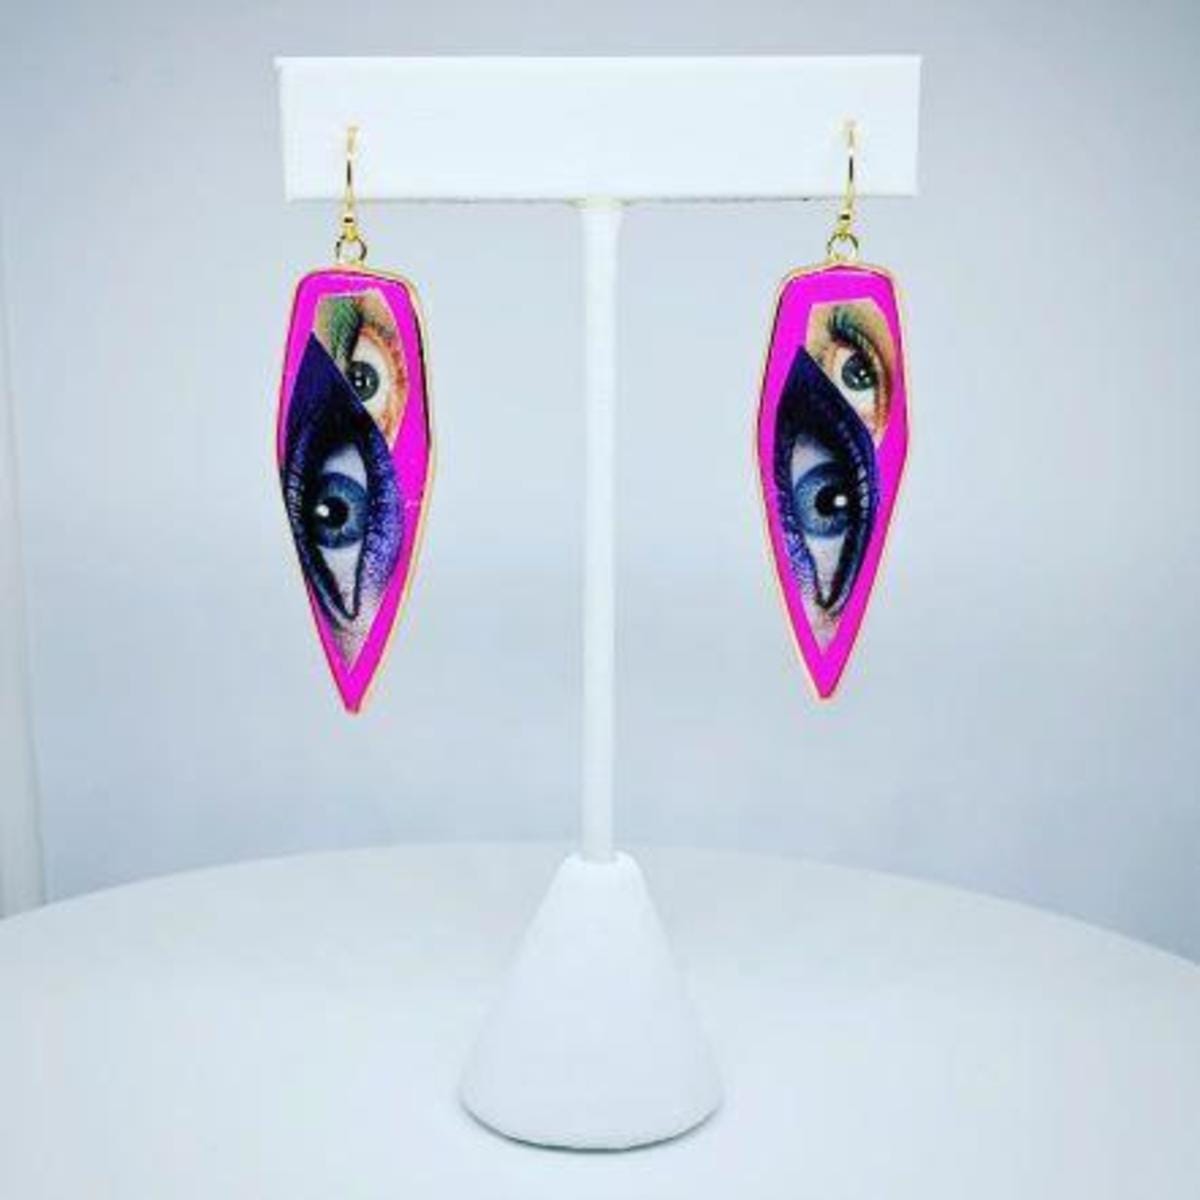 Staring Daggers (earrings) by Laura Collins 